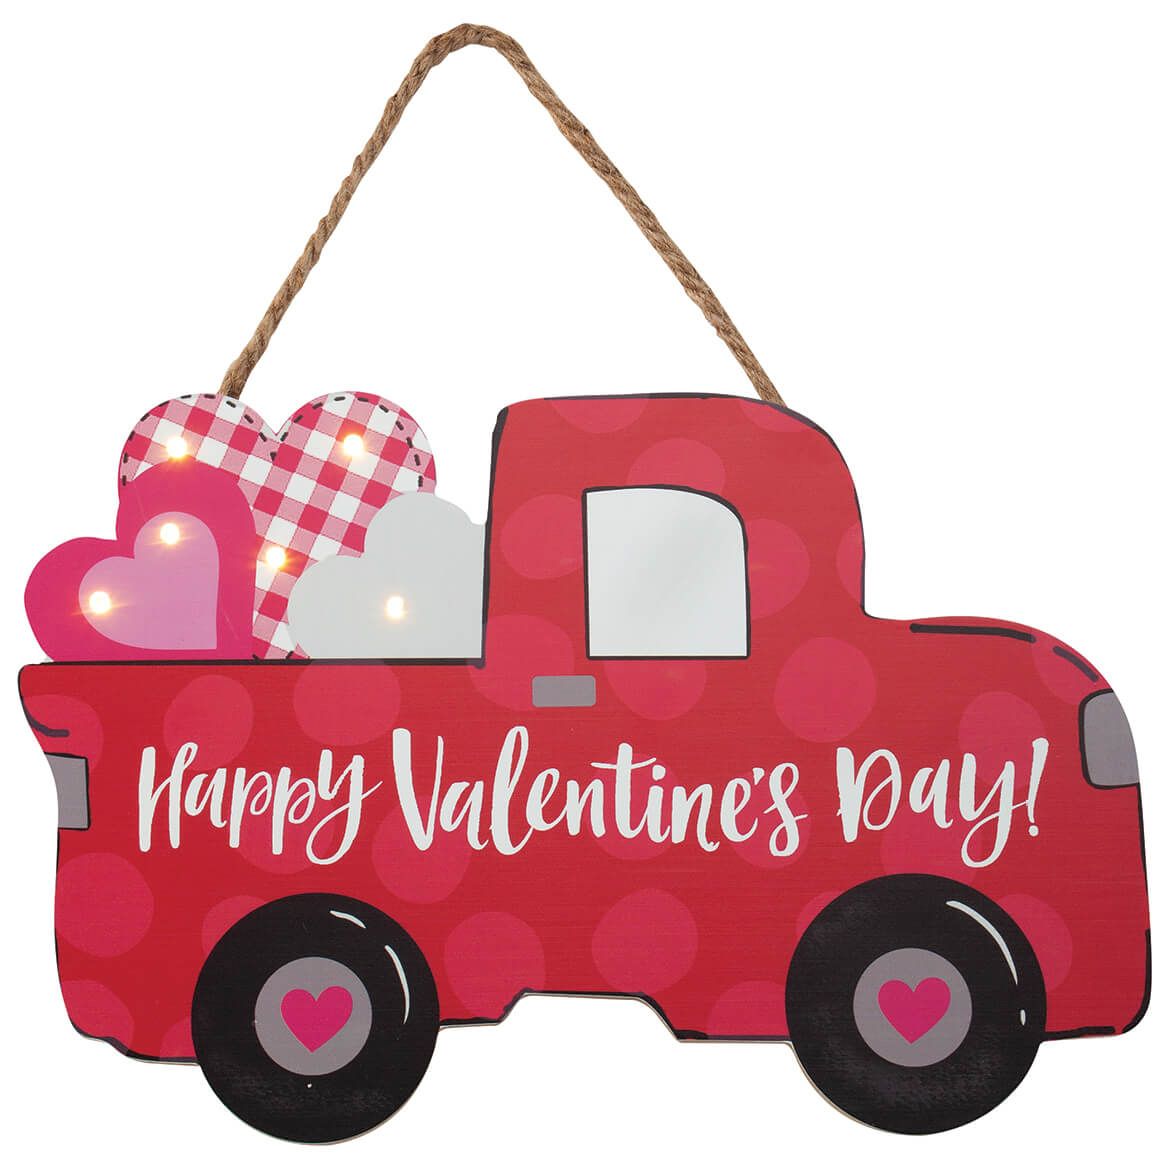 Valentine's Day Truck Lighted Hanger by Holiday Peak™ + '-' + 372420